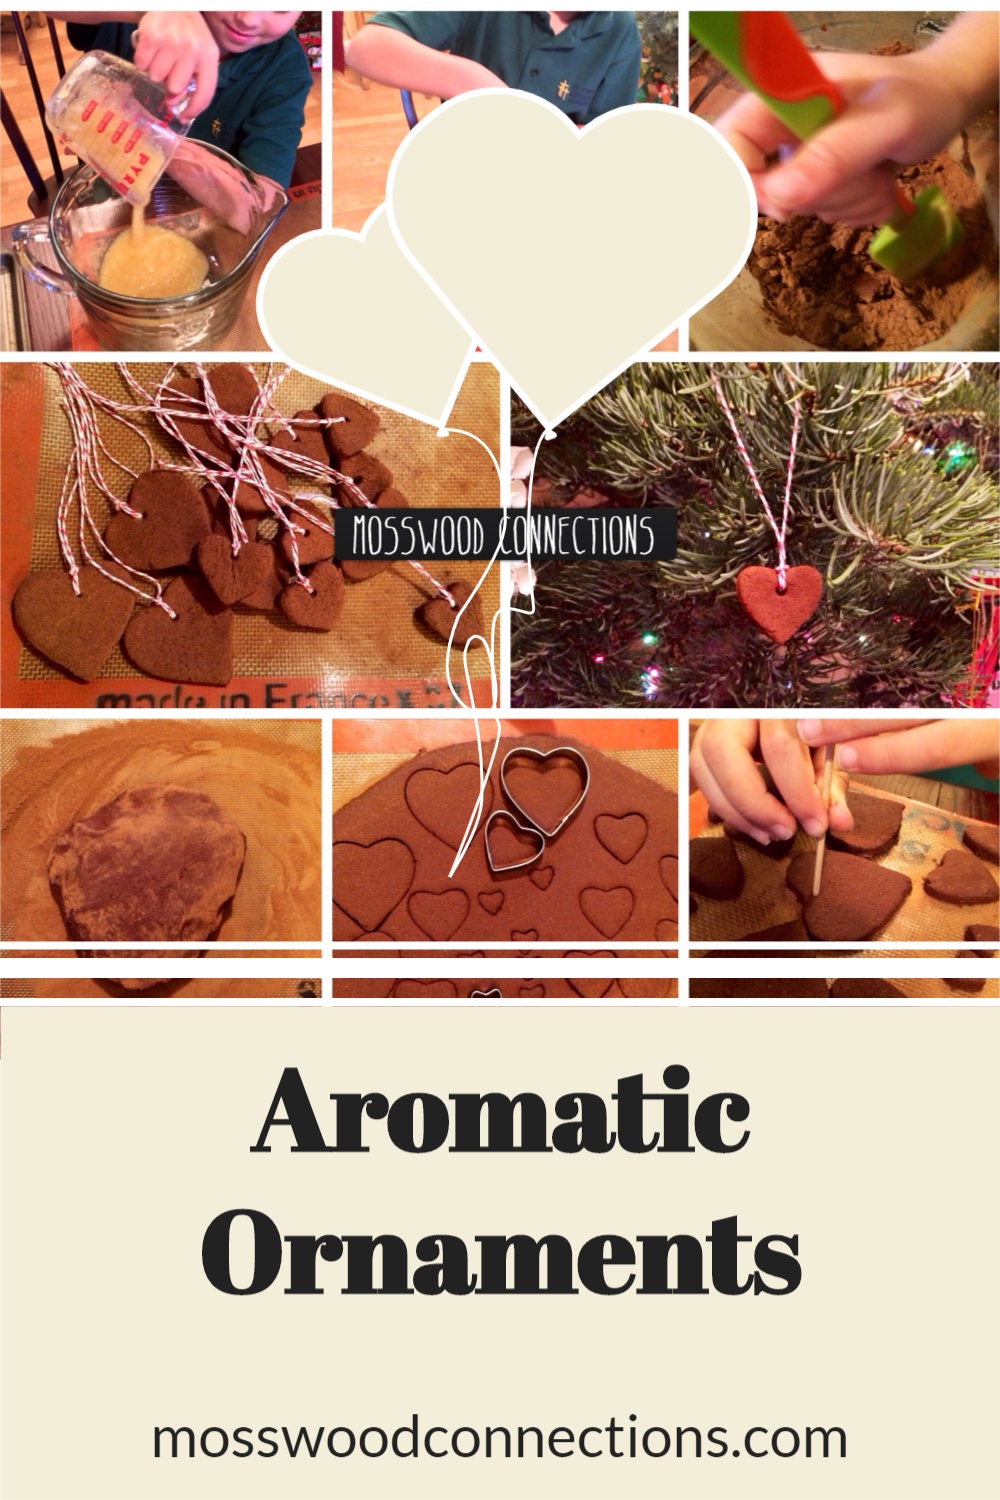 Aromatic Ornaments project is a sensory experience for the hands and the nose. #mosswoodconnections #holidays #ornaments  #sensory 